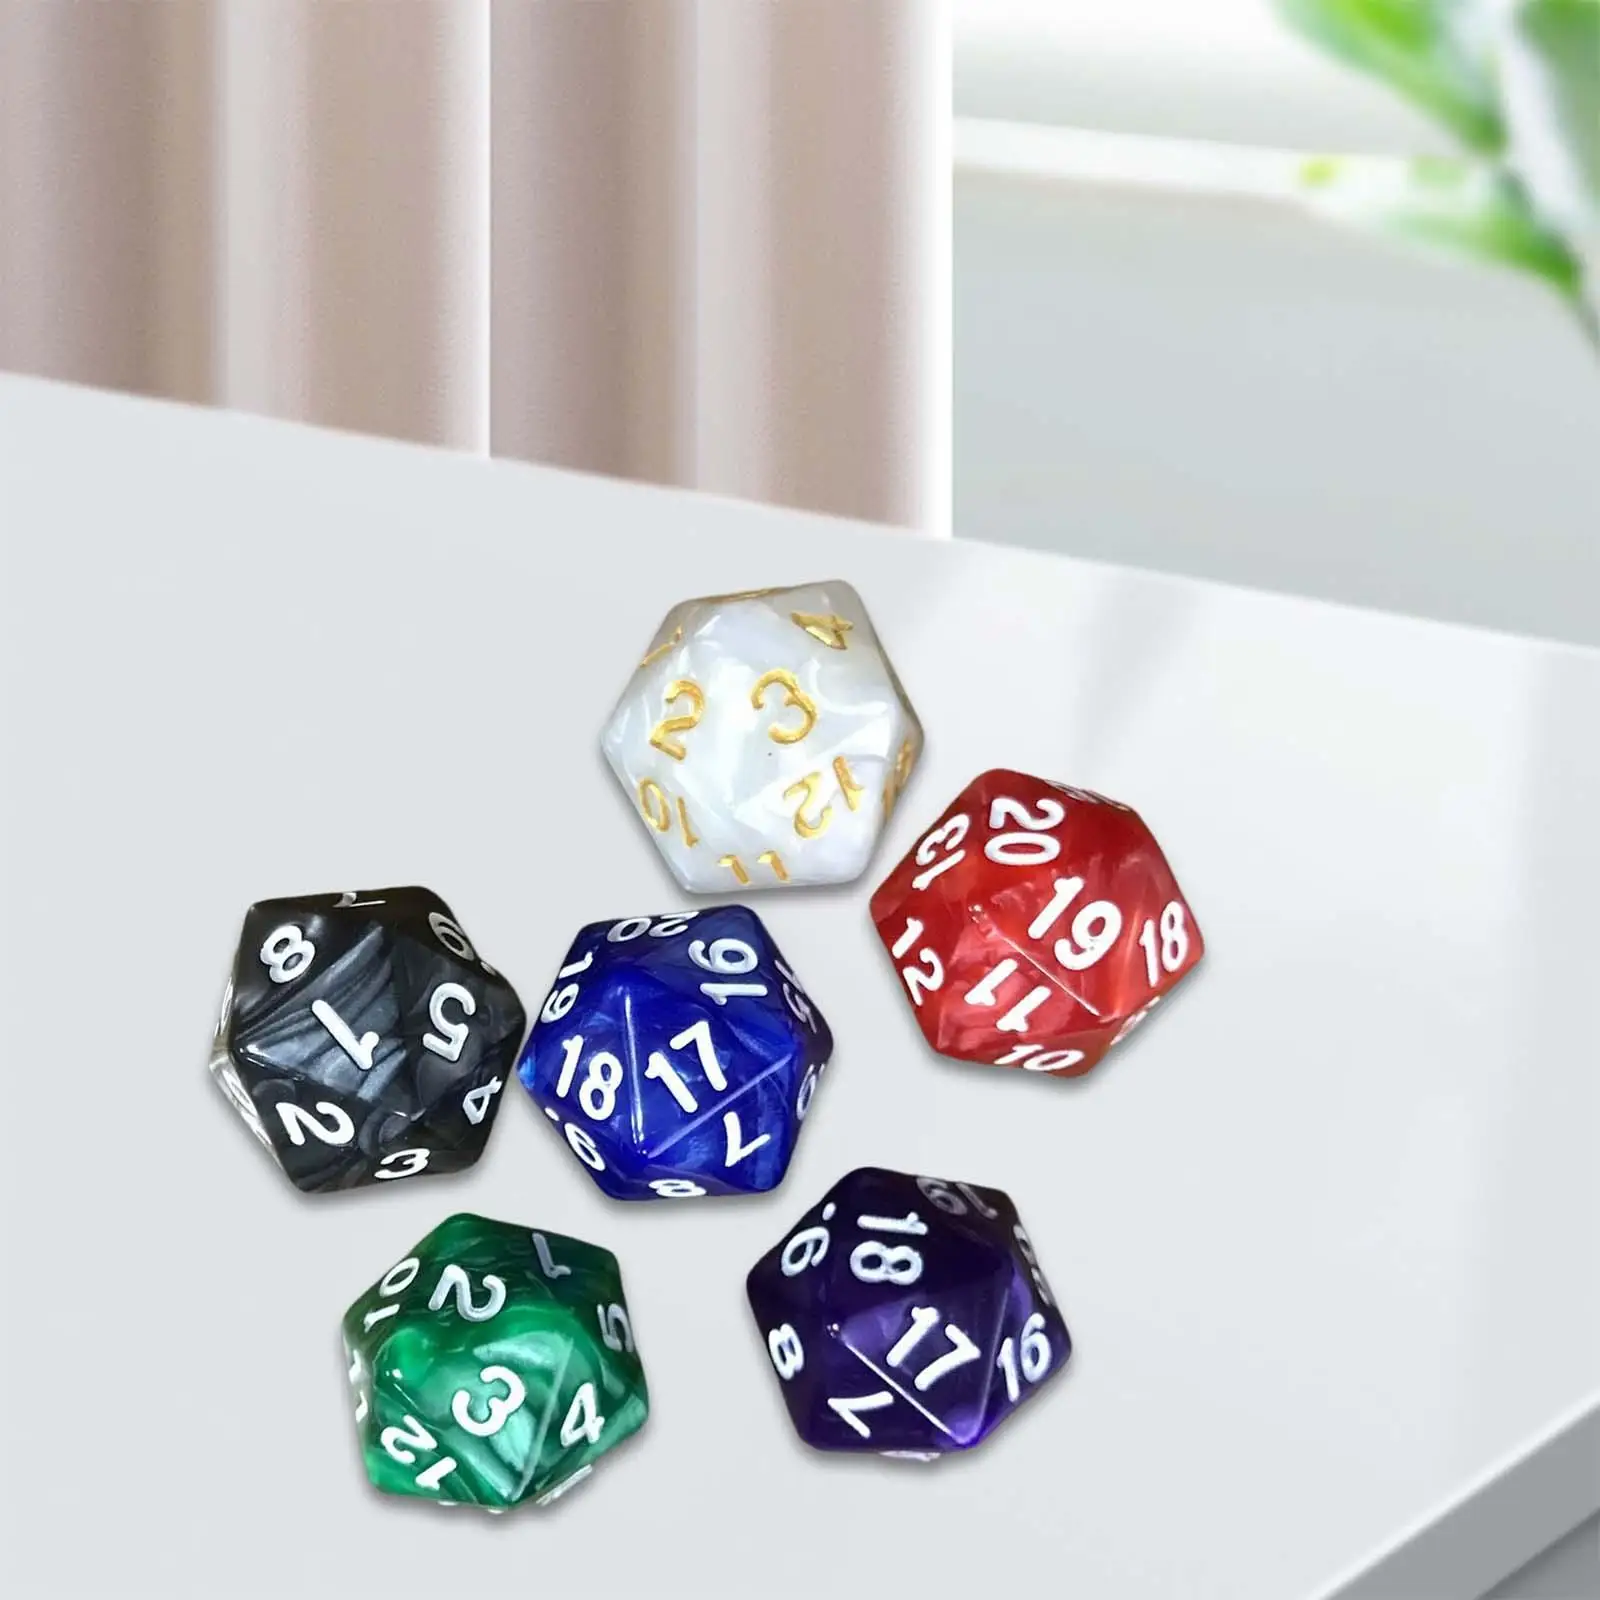 6x D20 Dices Acrylic 20mm Dices Entertainment Toys Party Supplies 20 Sided Dices Set D20 Polyhedral Dices for Party Table Game